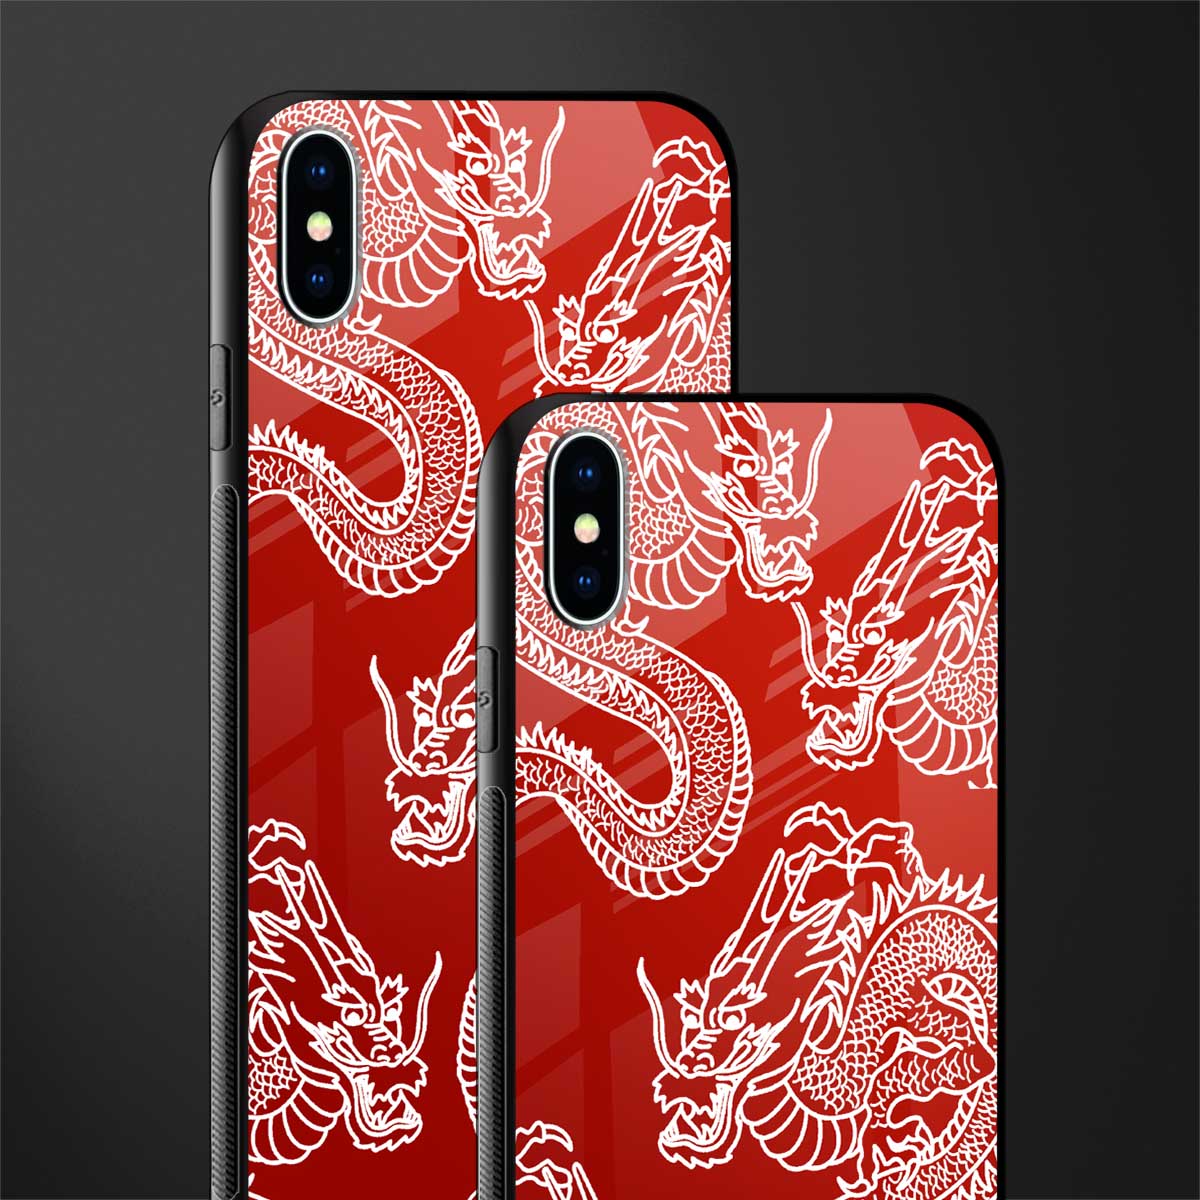 dragons red glass case for iphone xs max image-2